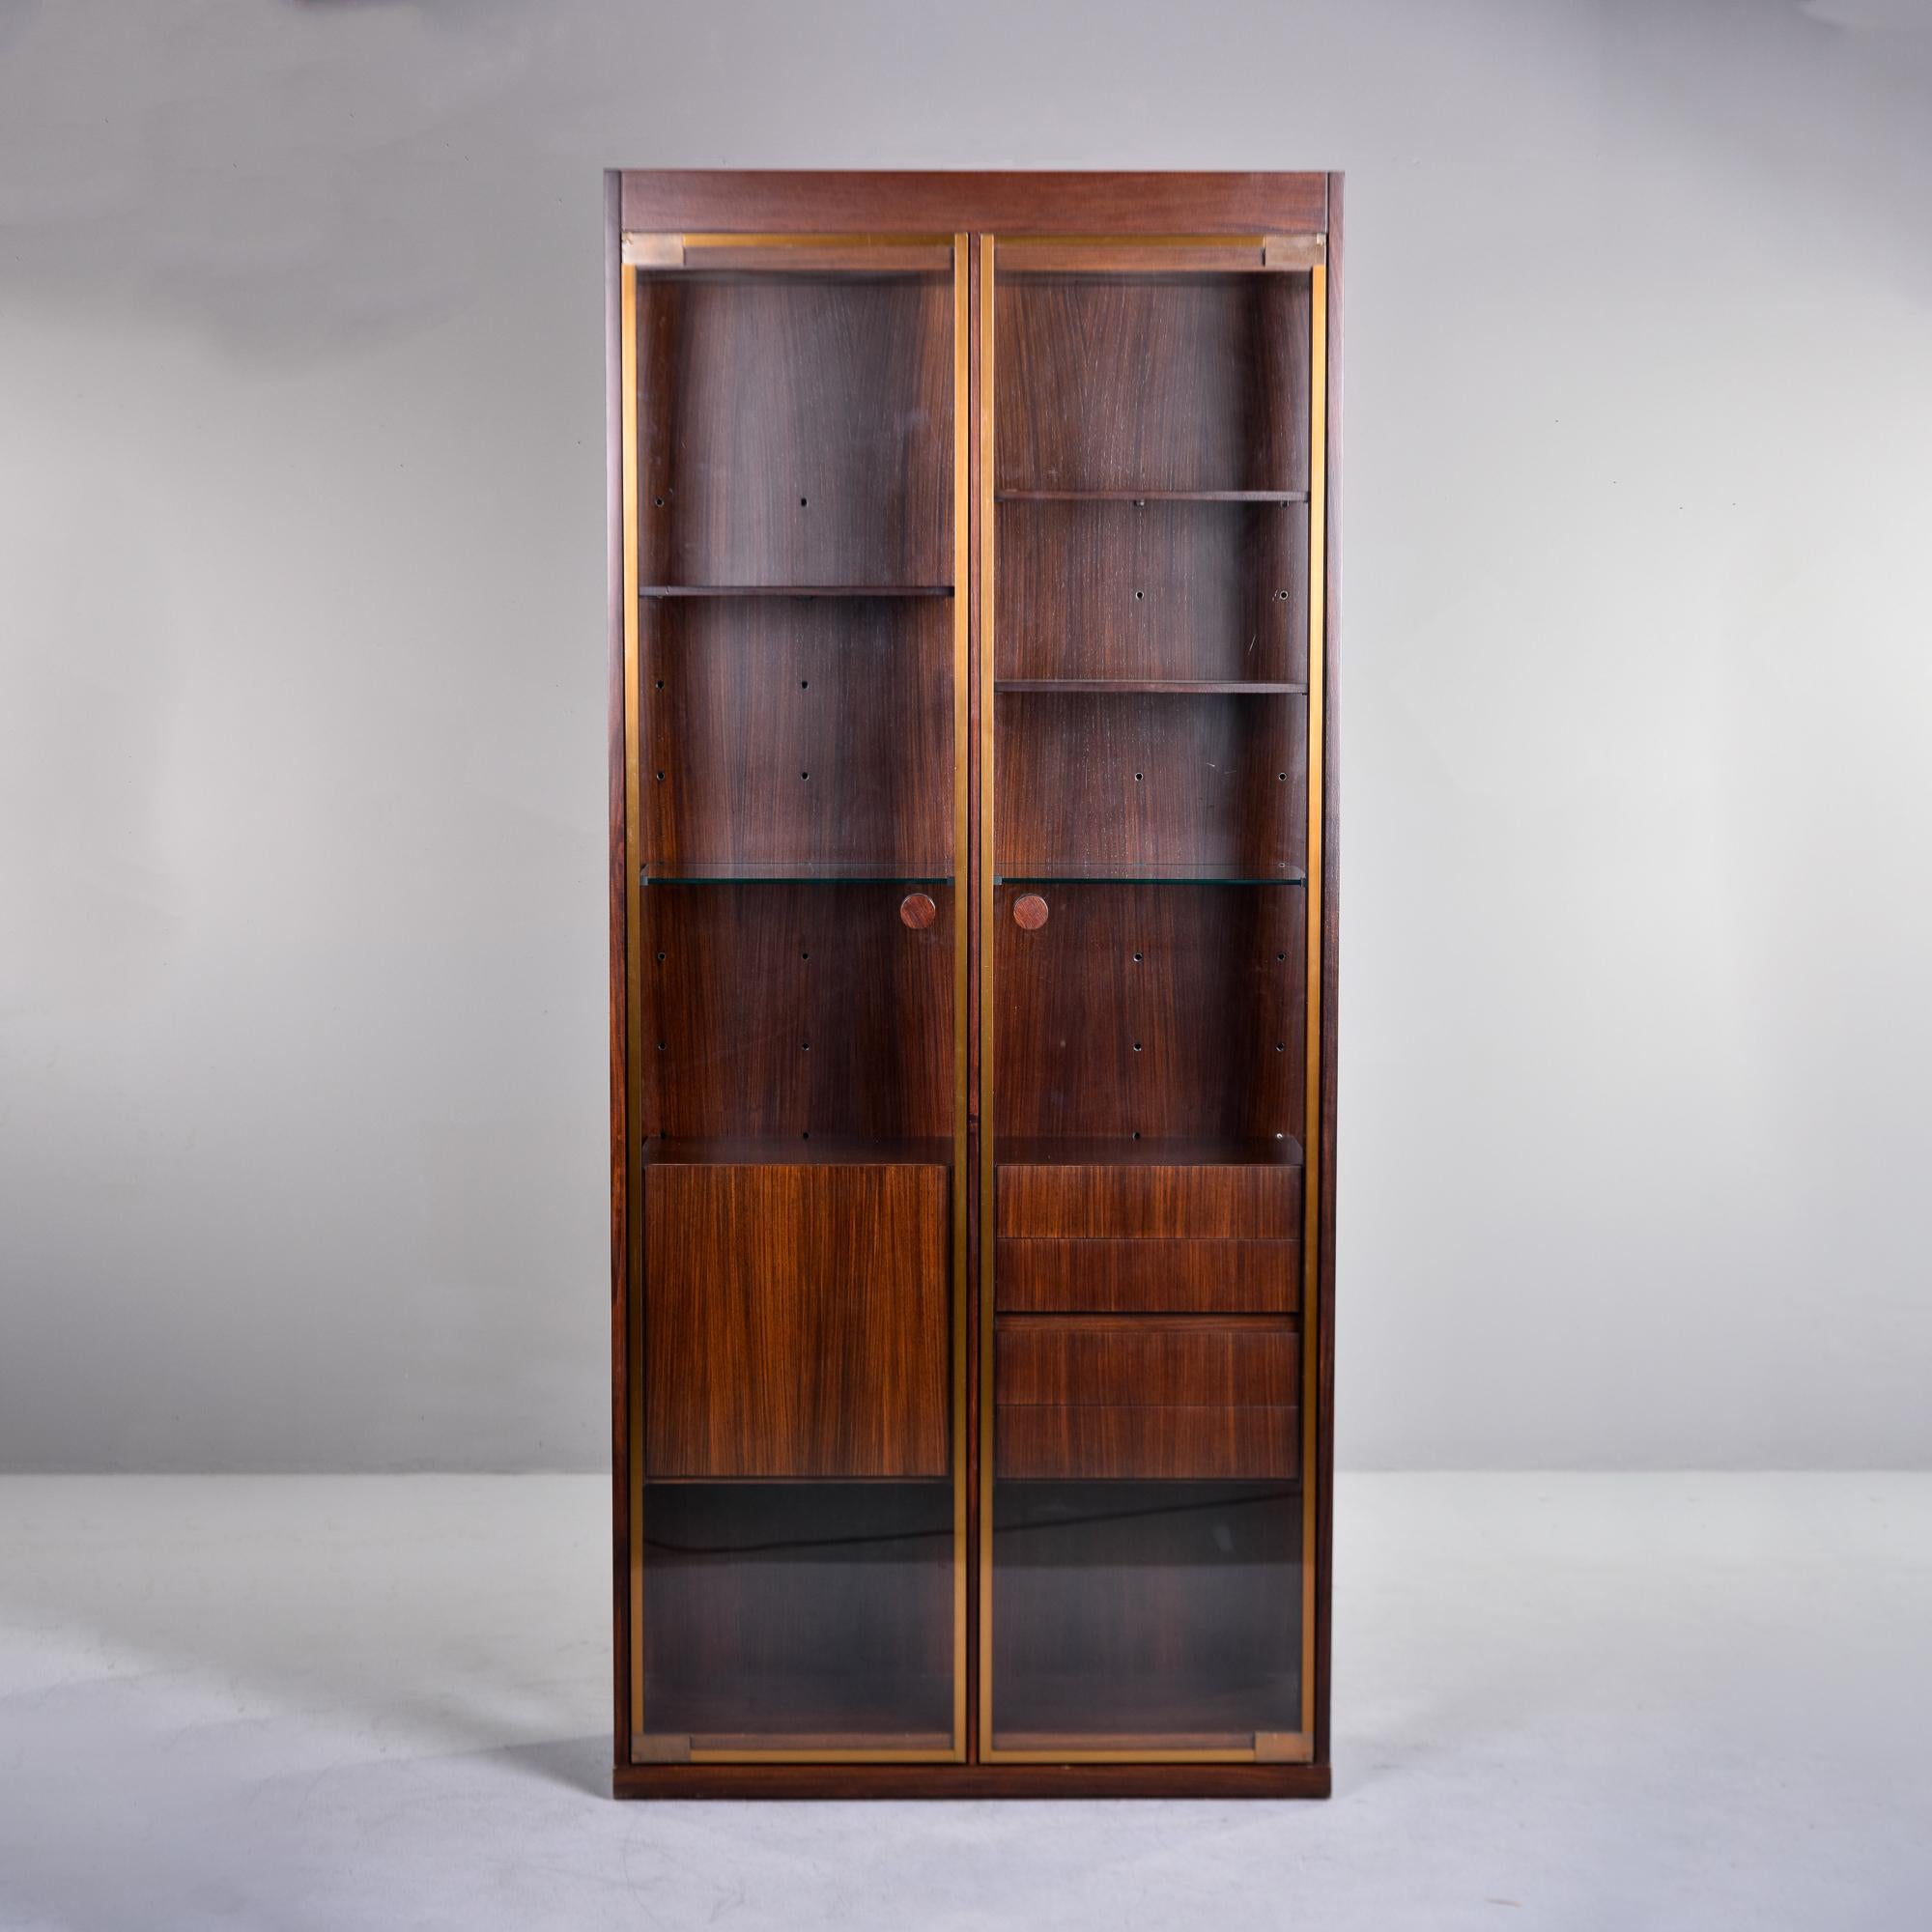 Found in France, this tall walnut and glass cabinet has a combination of drawers, adjustable shelves and compartment storage. Two glass doors with brass edge trim open to a stack of four drawers, adjustable wood and glass shelves, a fold down